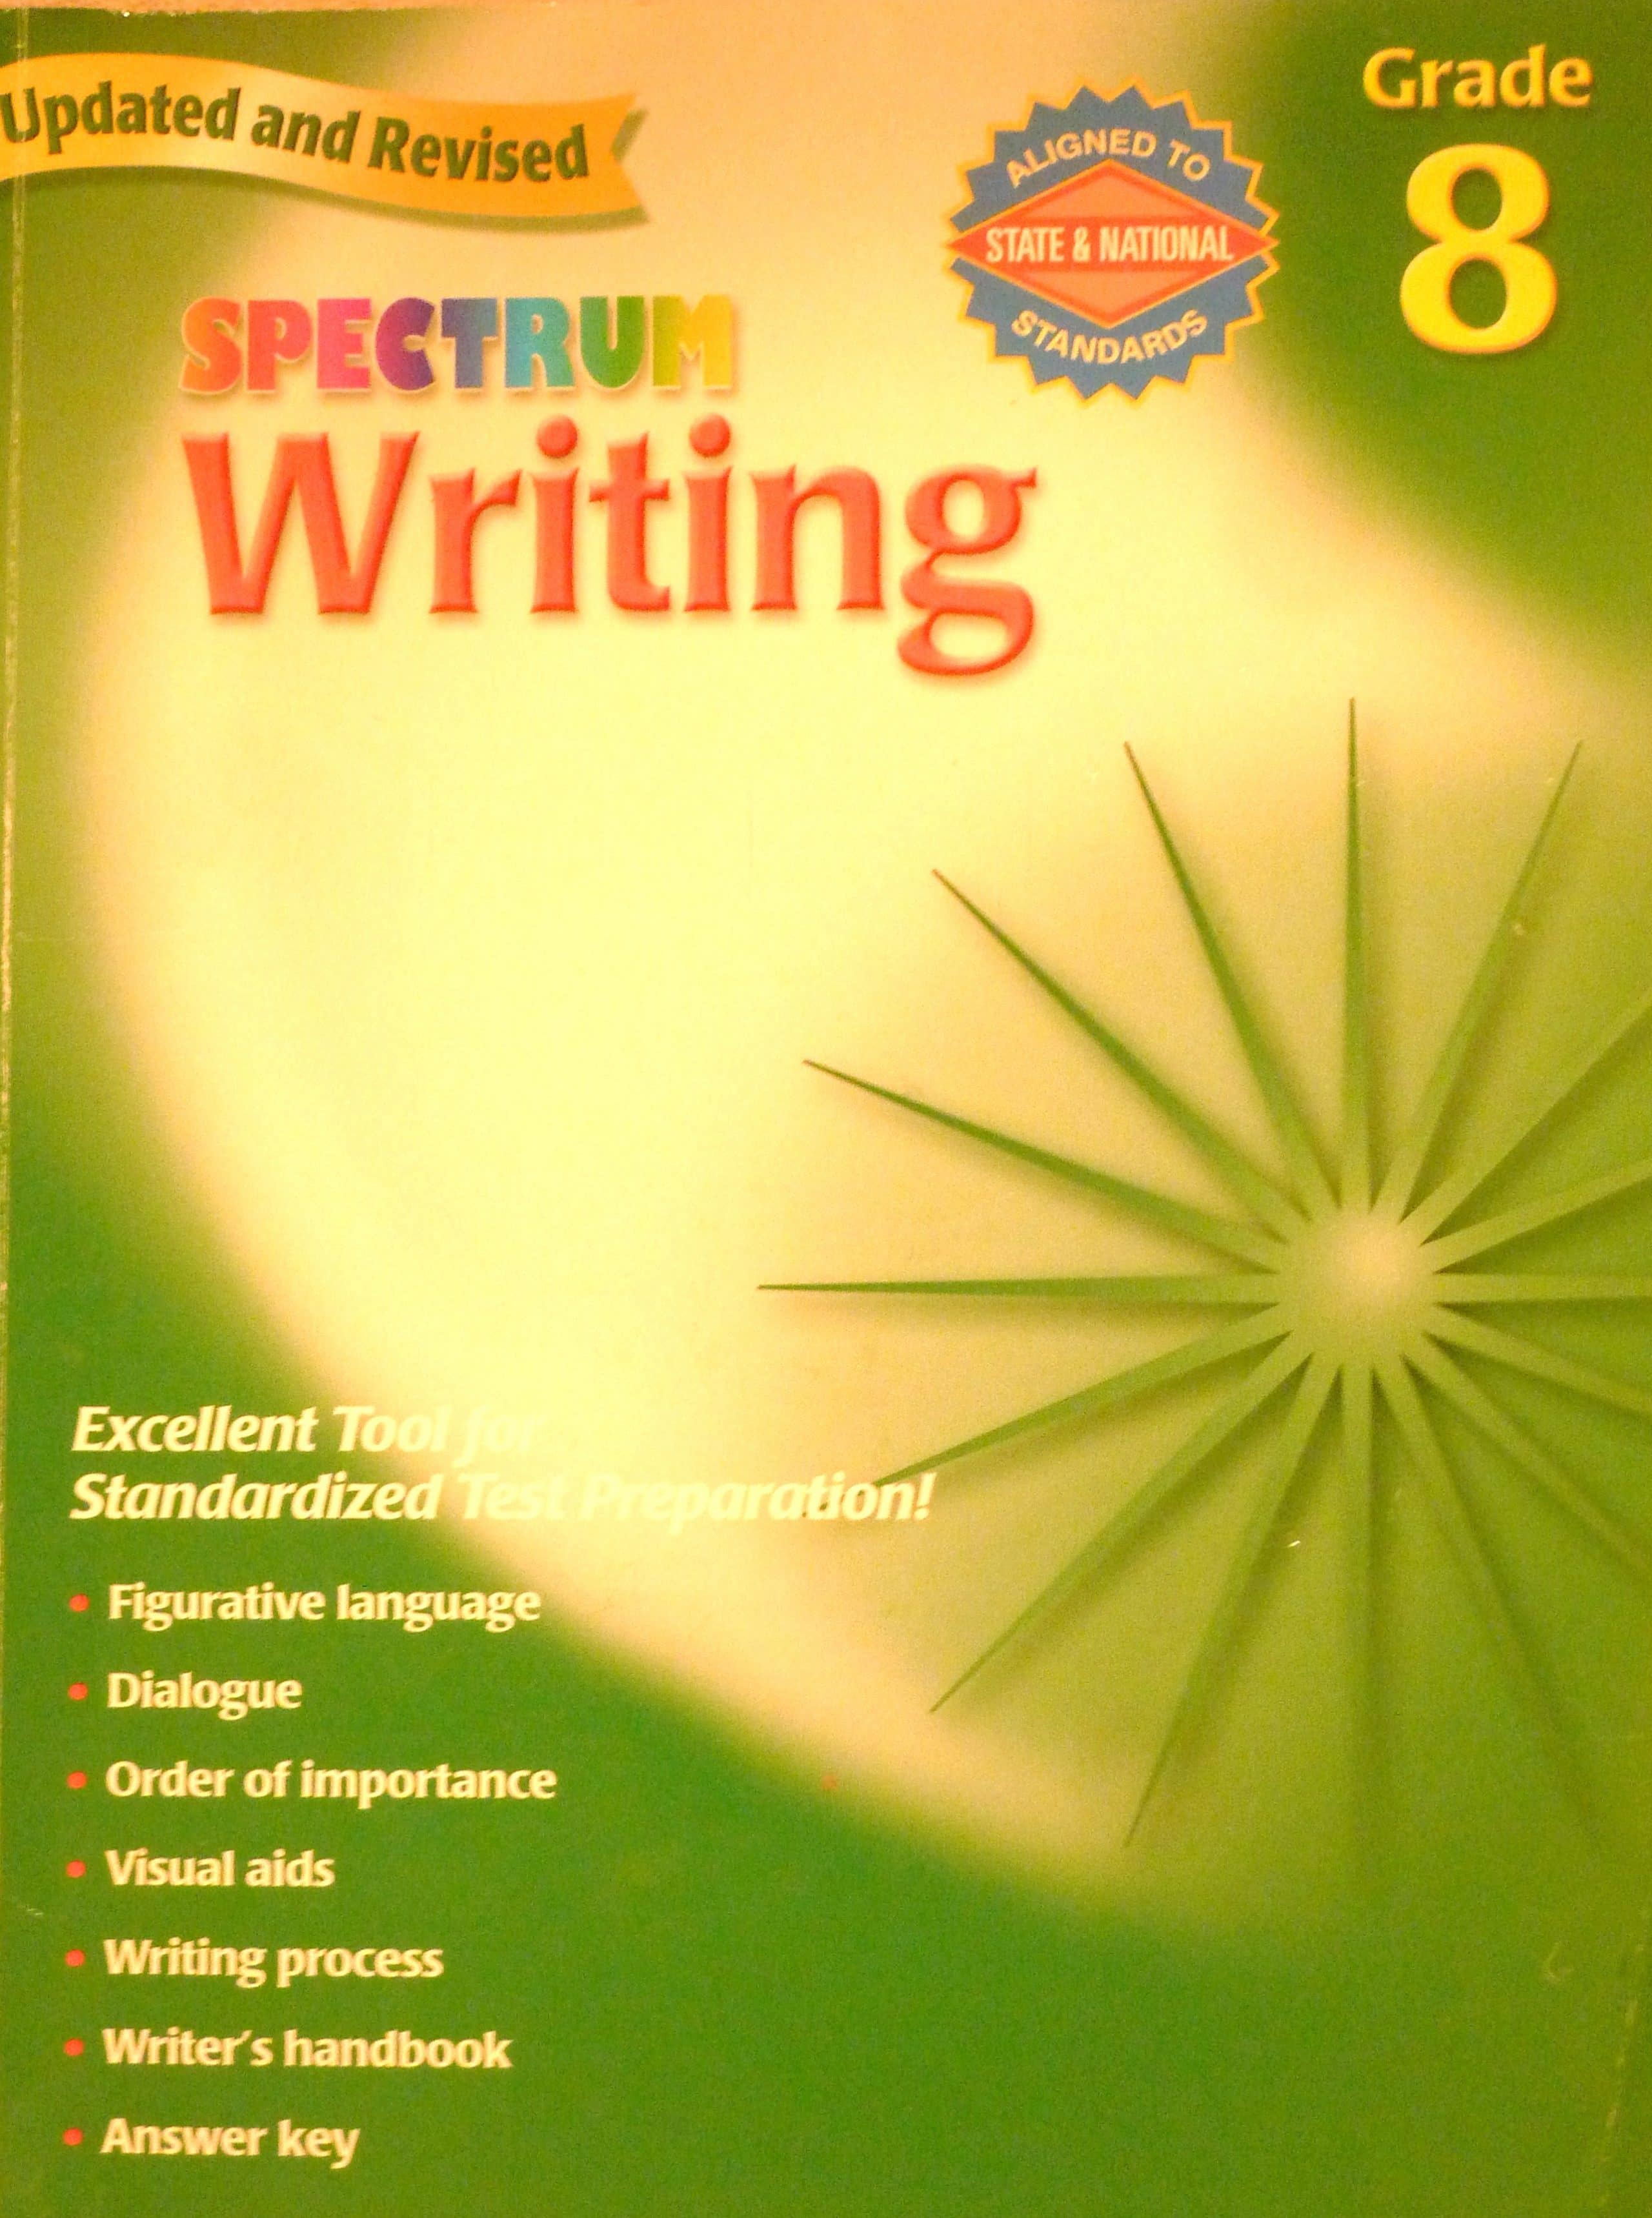 Spectrum Writing-8 Review